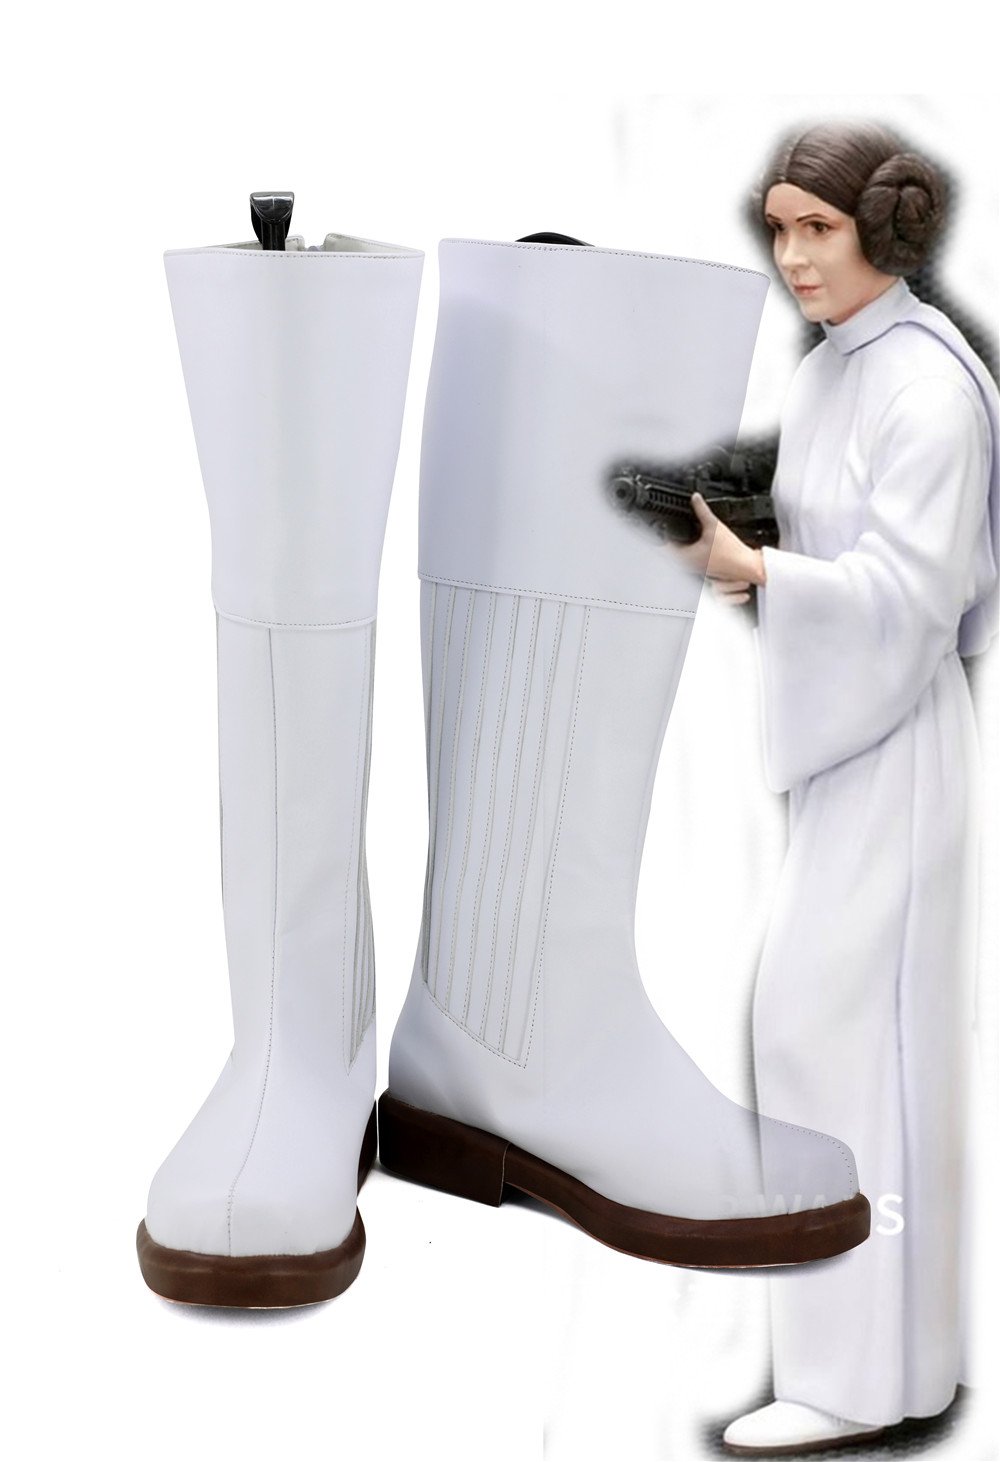 Star Wars Pricess Leia Cosplay Shoes Boots White